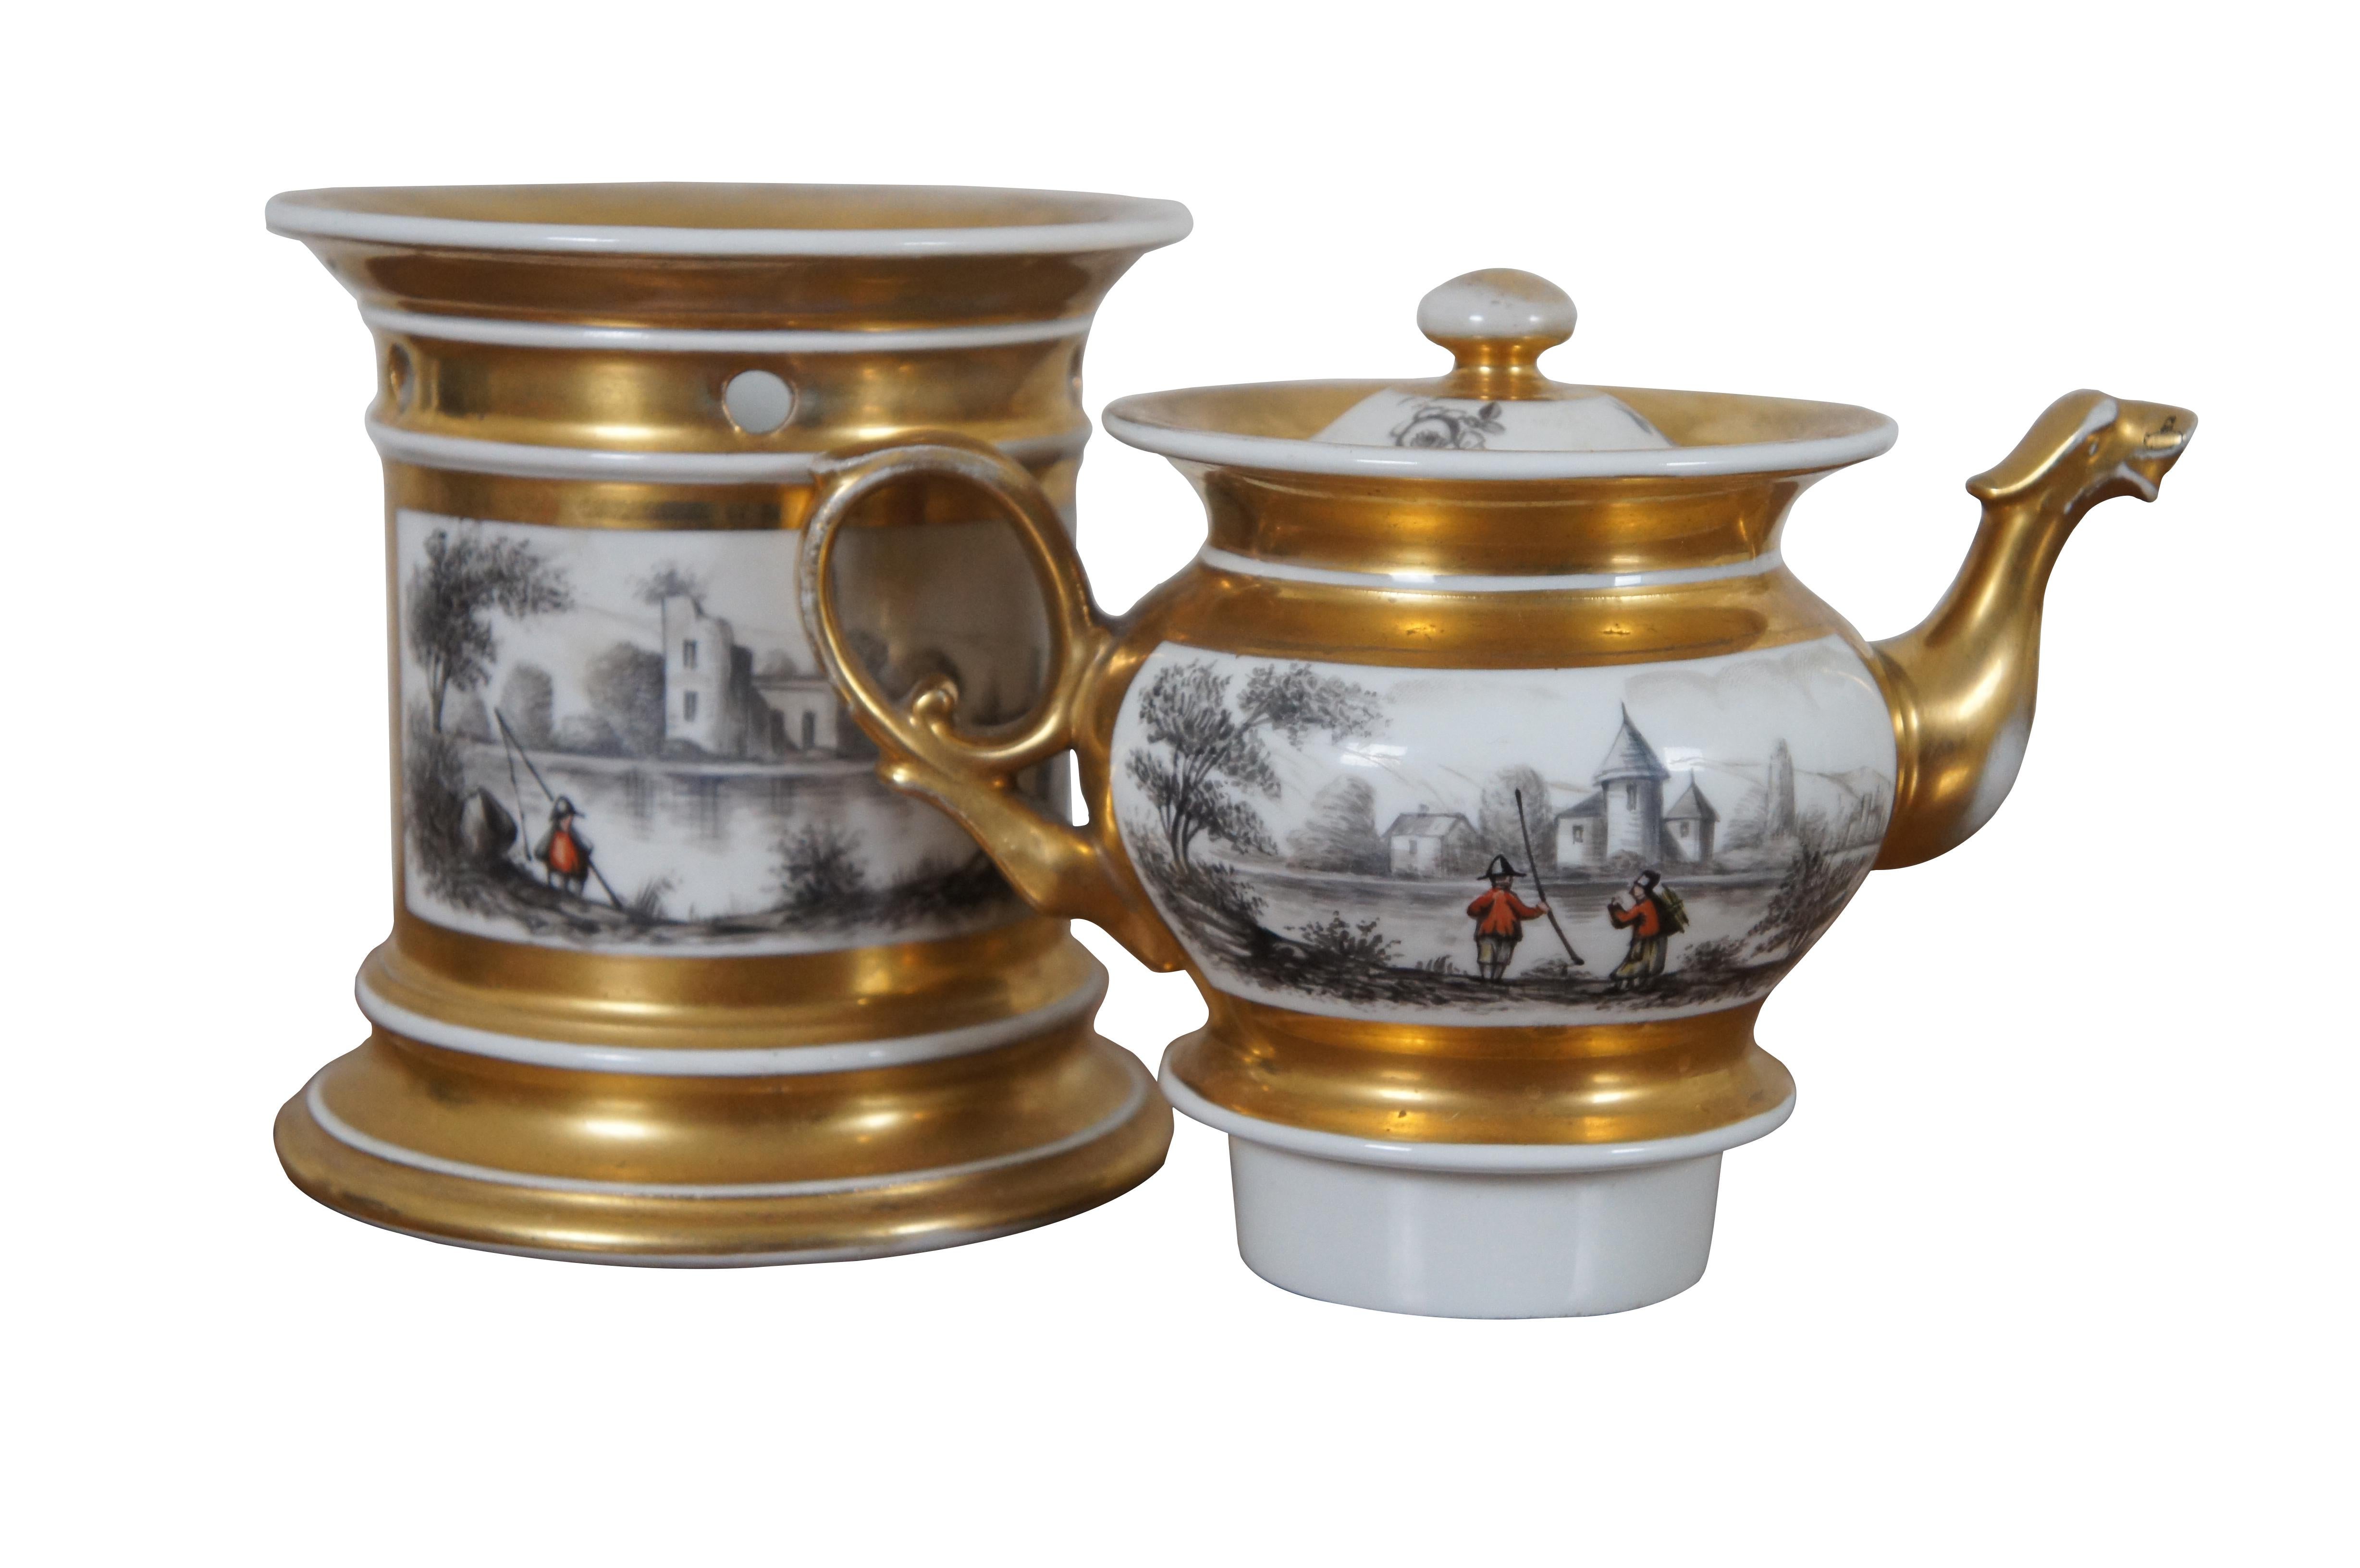 Antique 19th century porcelain veilleuse tisaniere - French teapot warmer made of white porcelain gilded throughout around black and white hand painted farmhouse landscape / lake / river / fishing scene with red and yellow painted figures.  Marked